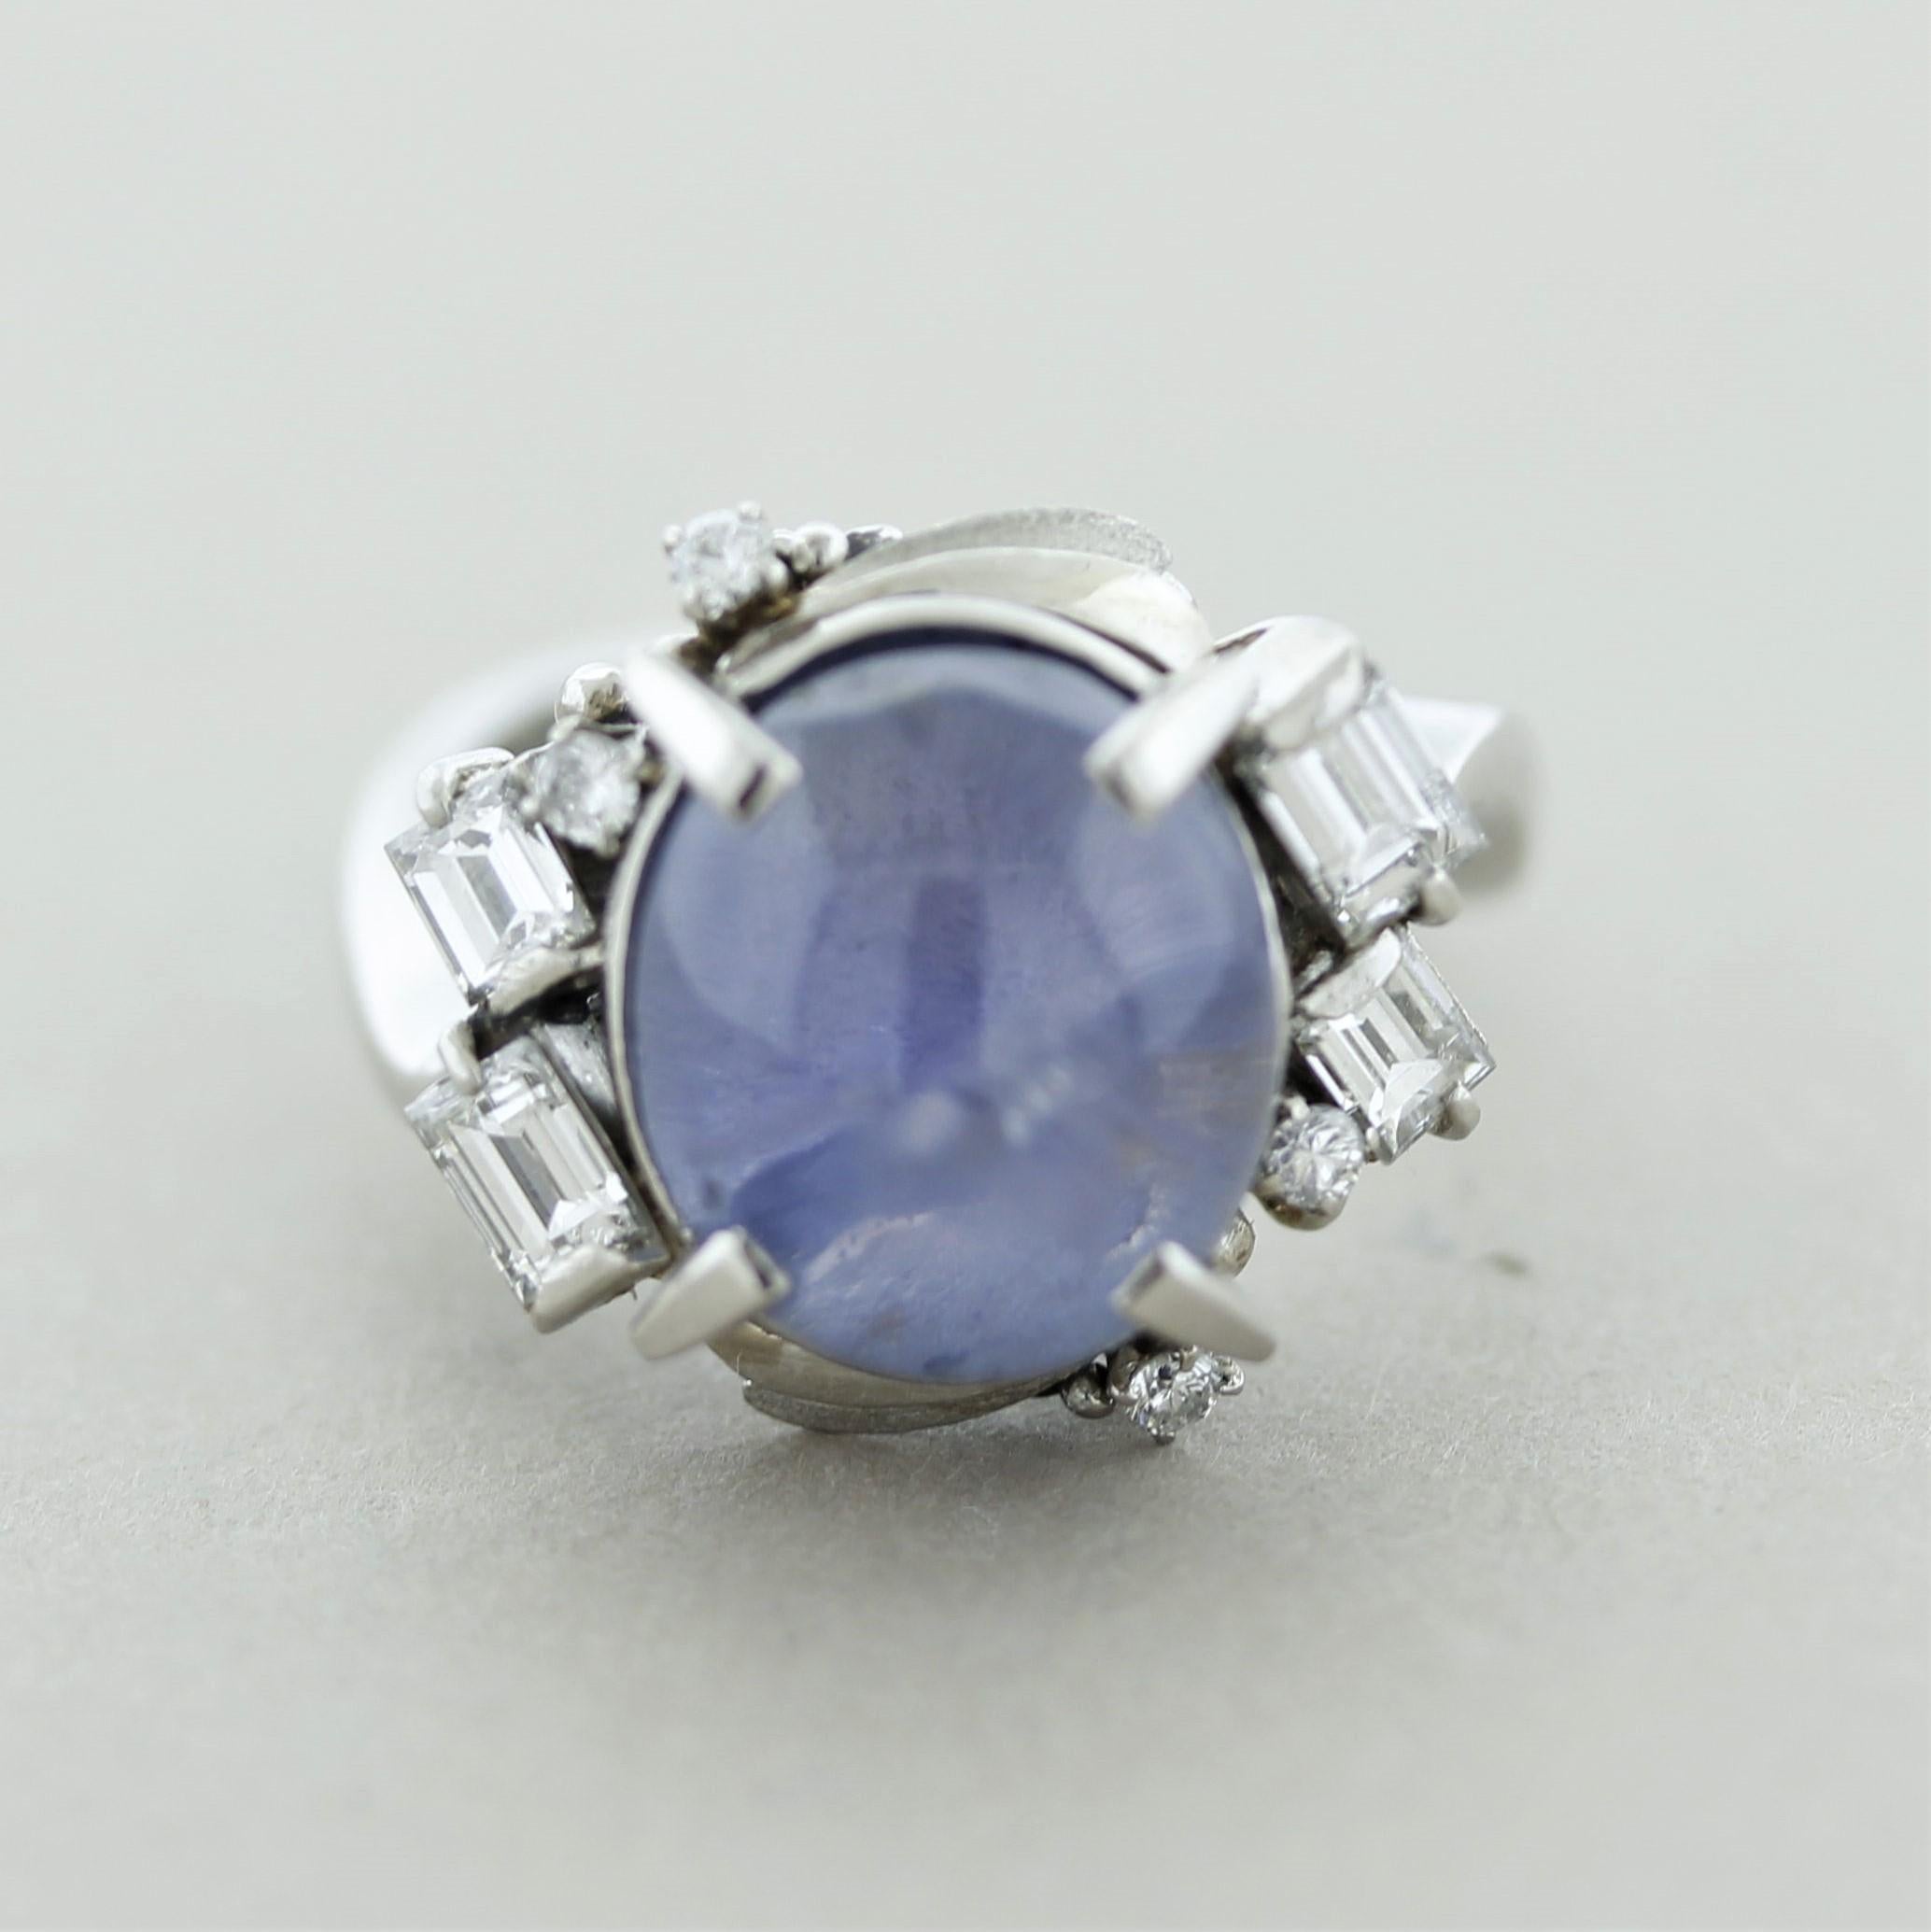 A dazzling mid-century ring, circa 1960’s. It features a 9.35 carat star sapphire with excellent transparency, your eyes will get lost inside the stone. Accenting the sapphire are 4 large chunky baguette-cut diamonds along with 4 round brilliants,